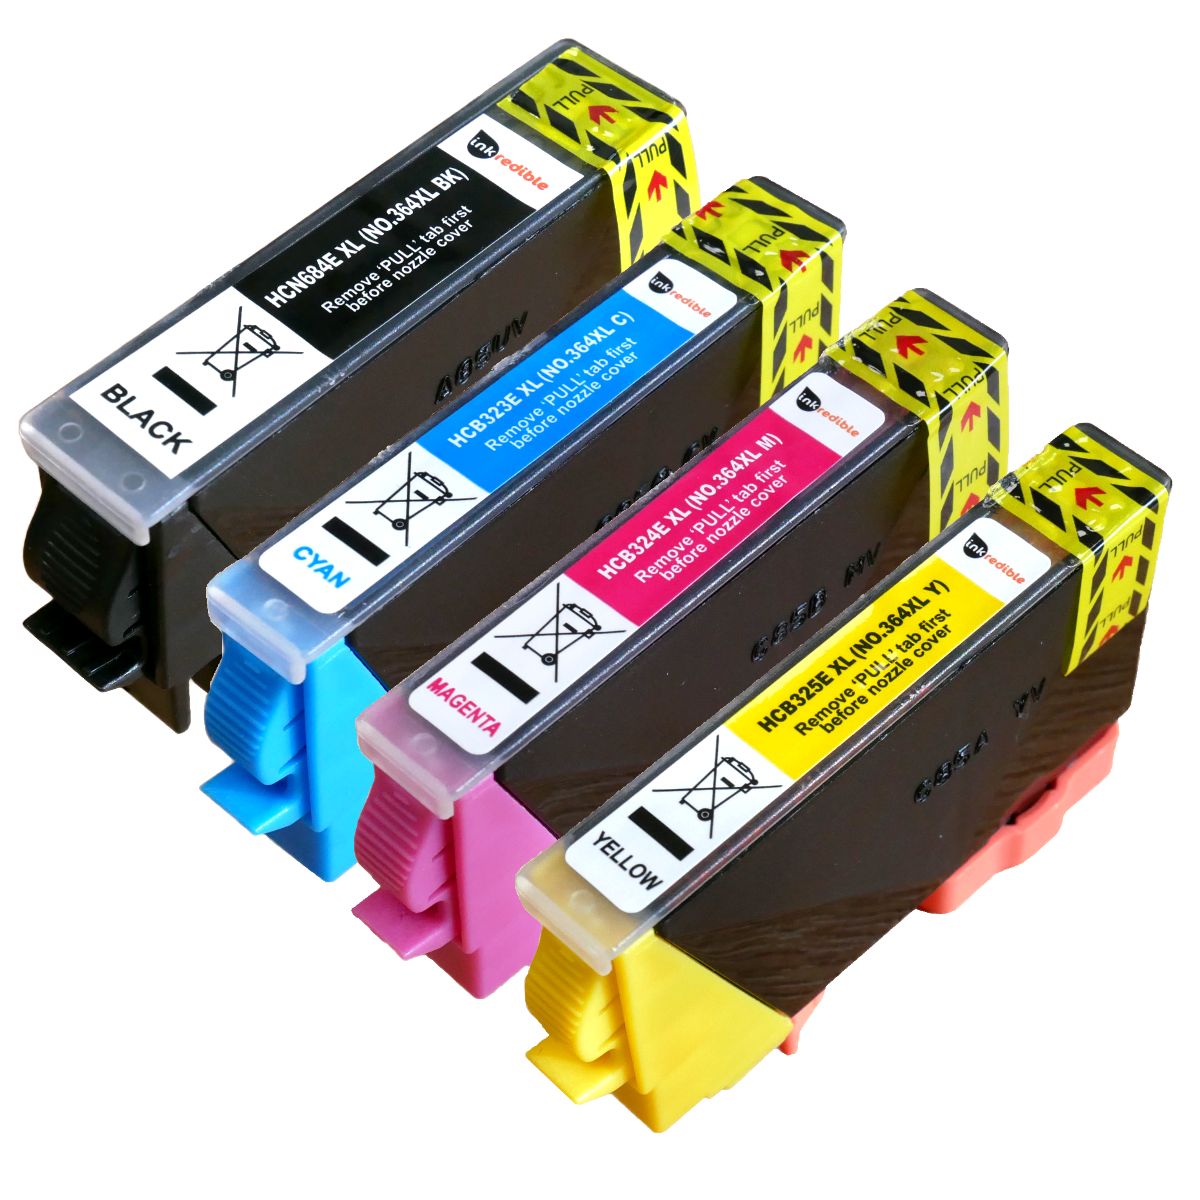 https://www.inkredible.co.uk/images/thumbs/009/0091761_compatible-hp-364-xl-multipack-4-pack-ink-cartridges-121ed7e7-f81e-45e4-aa6a-c8efa5ee7a3d.png